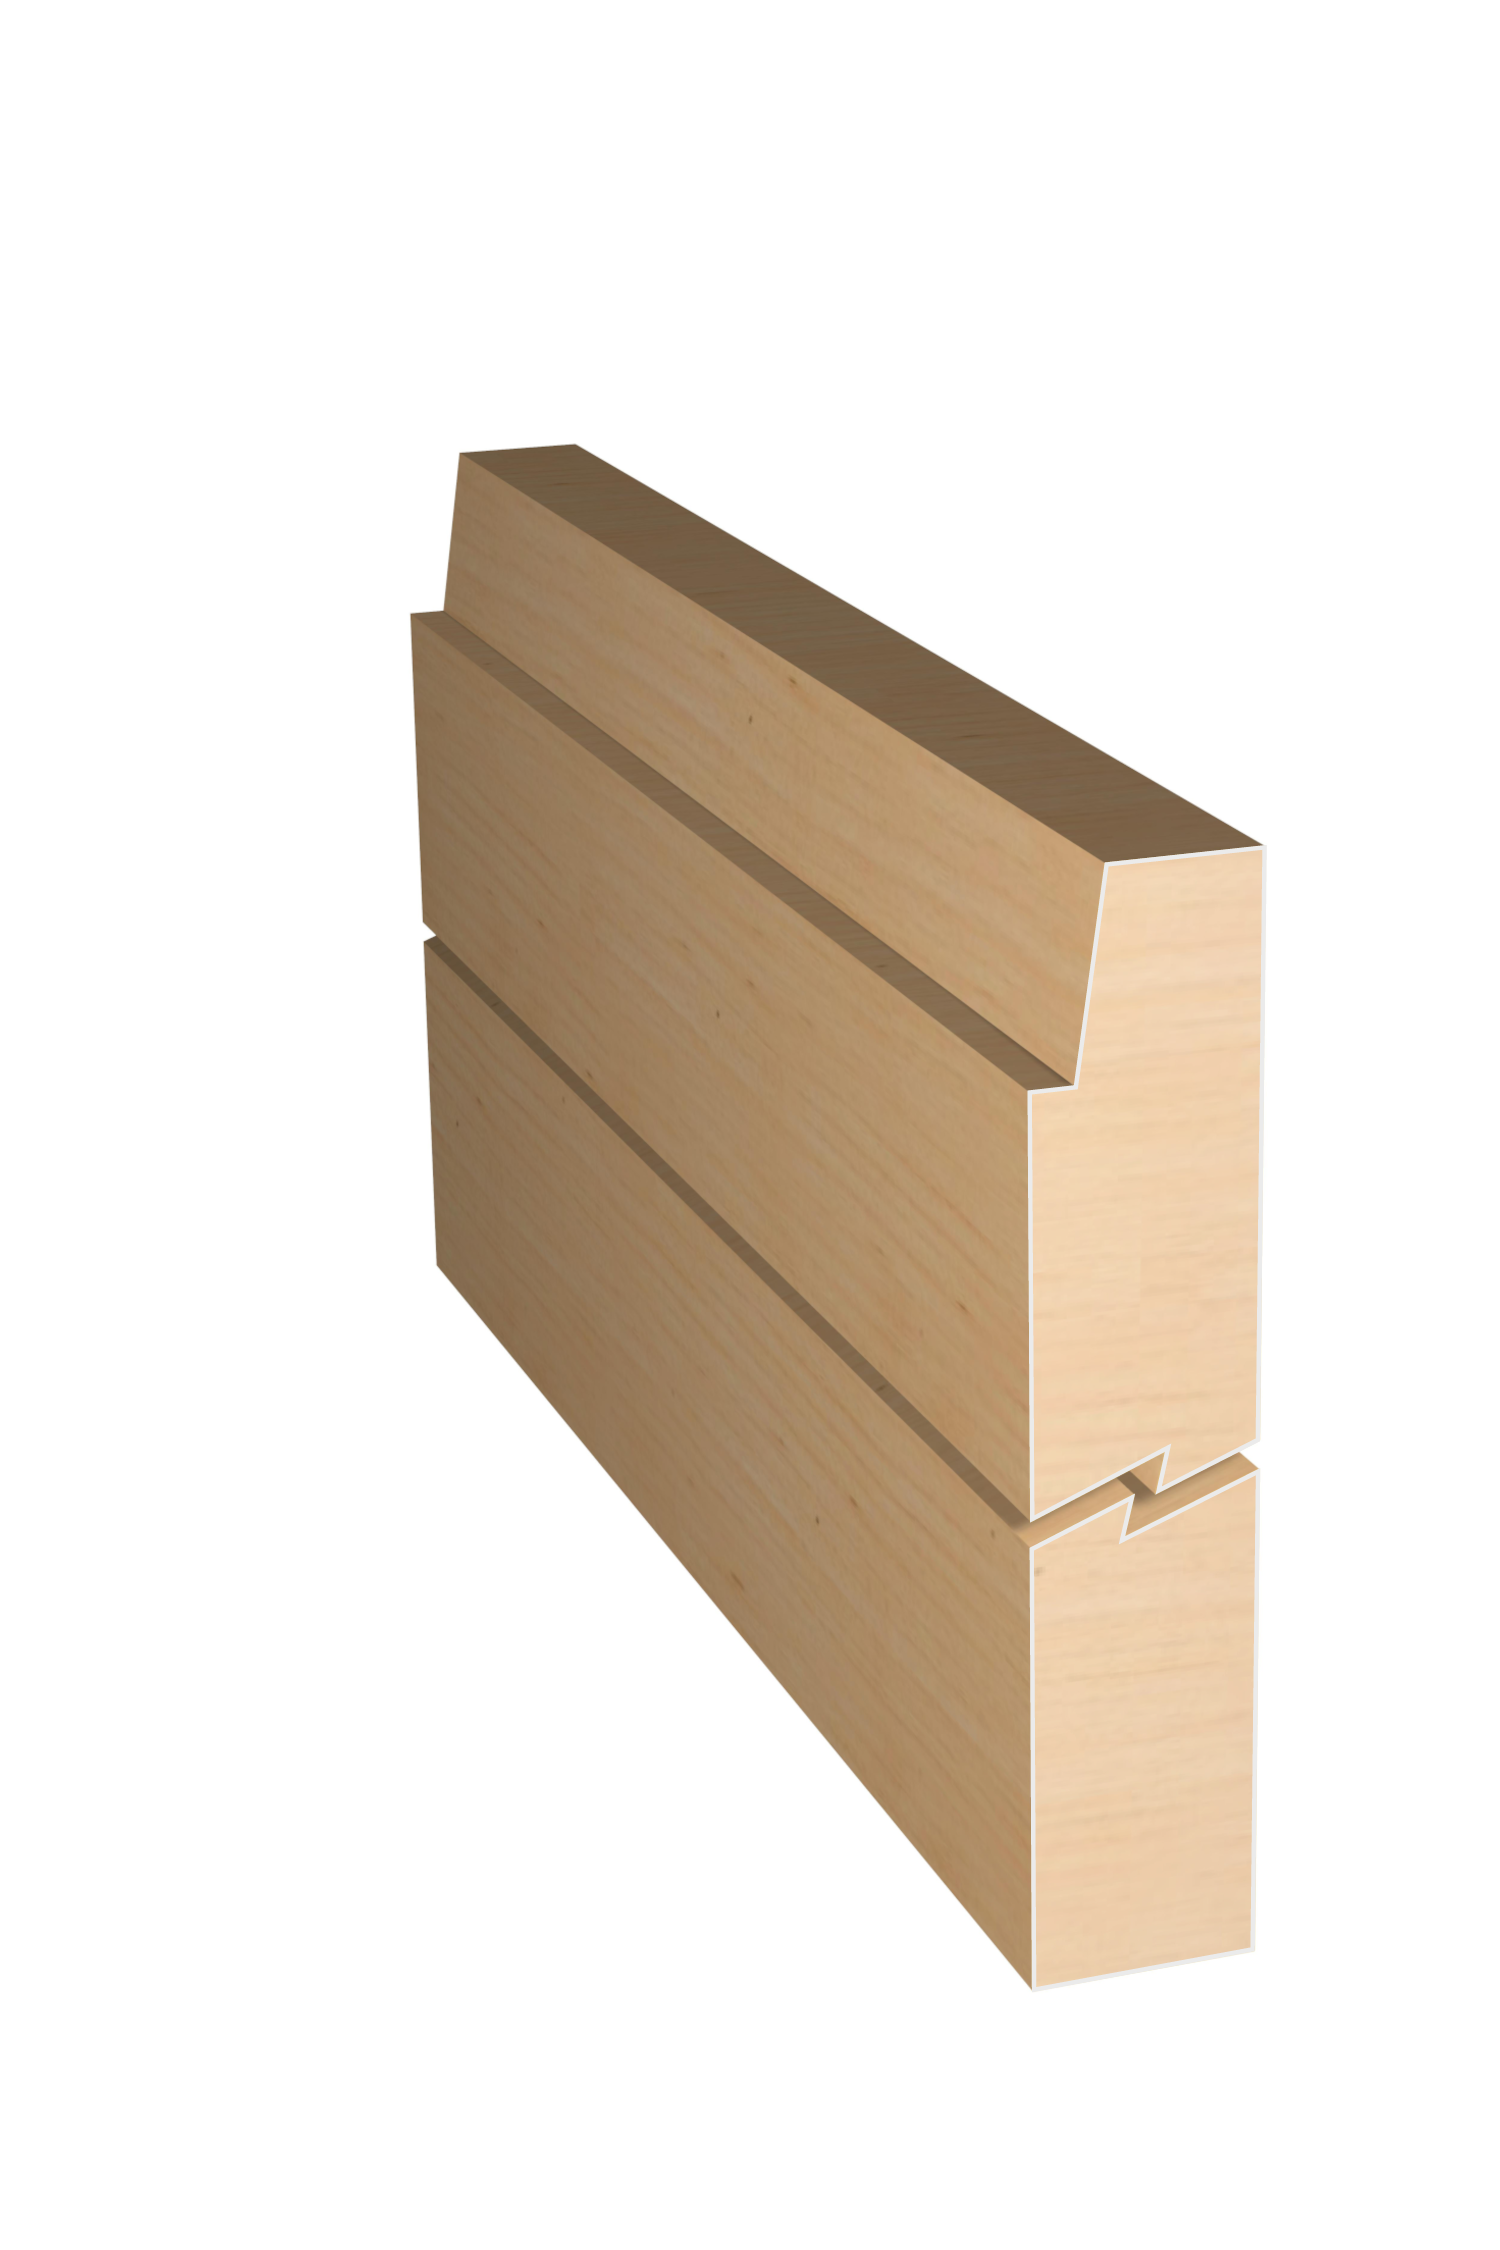 Three dimensional rendering of custom edge profile wood molding SKPL72 made by Public Lumber Company in Detroit.